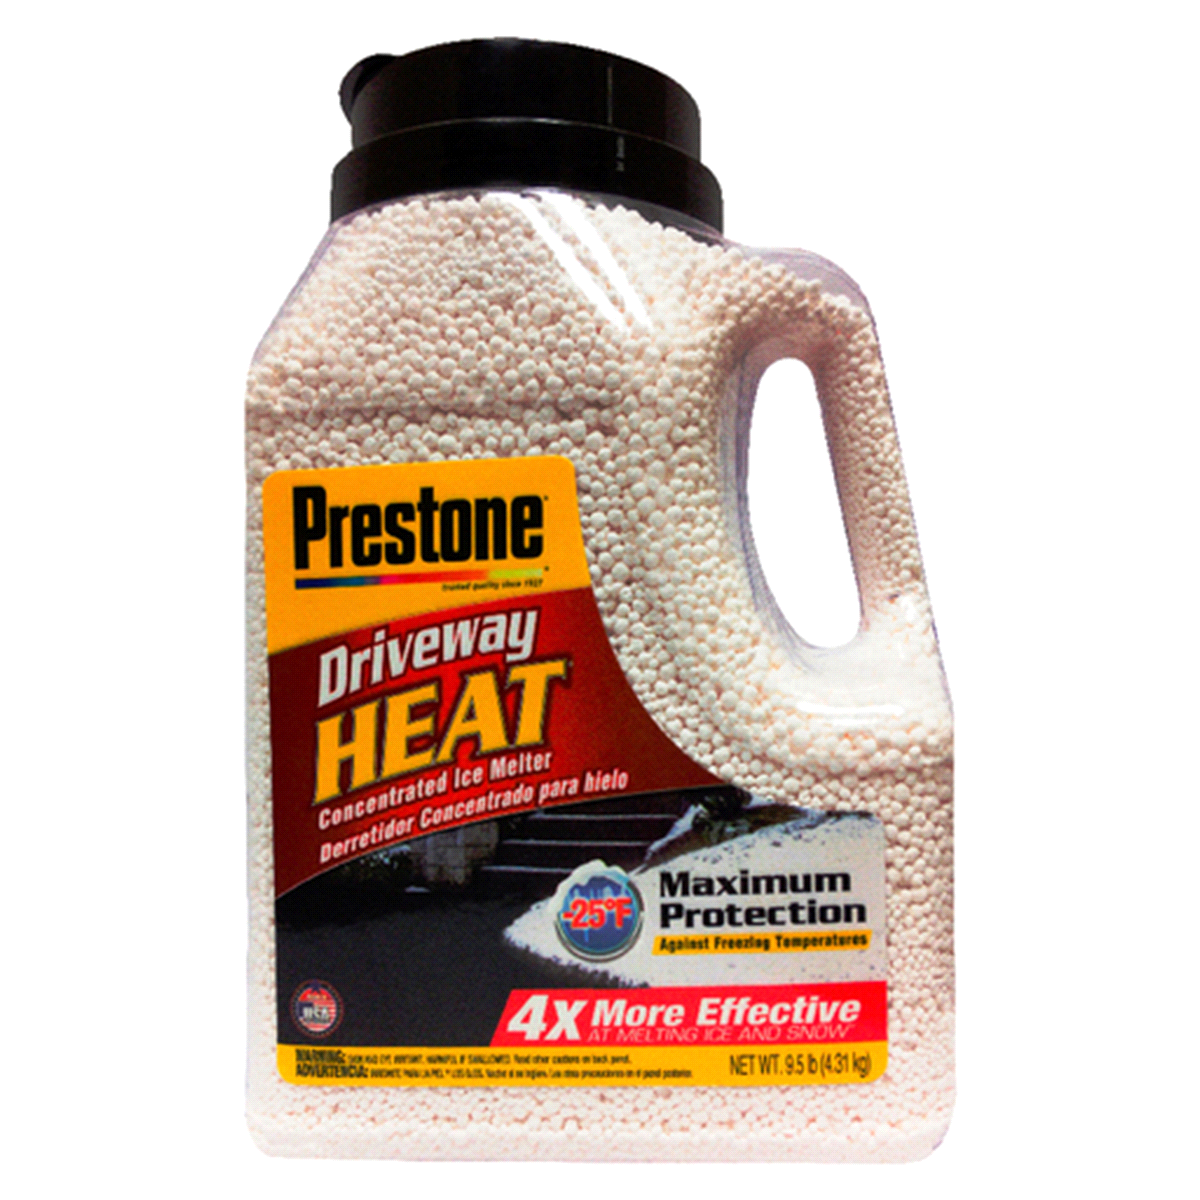 slide 1 of 1, Prestone Driveway Heat Concentrated Ice Melter, 9.5 lb